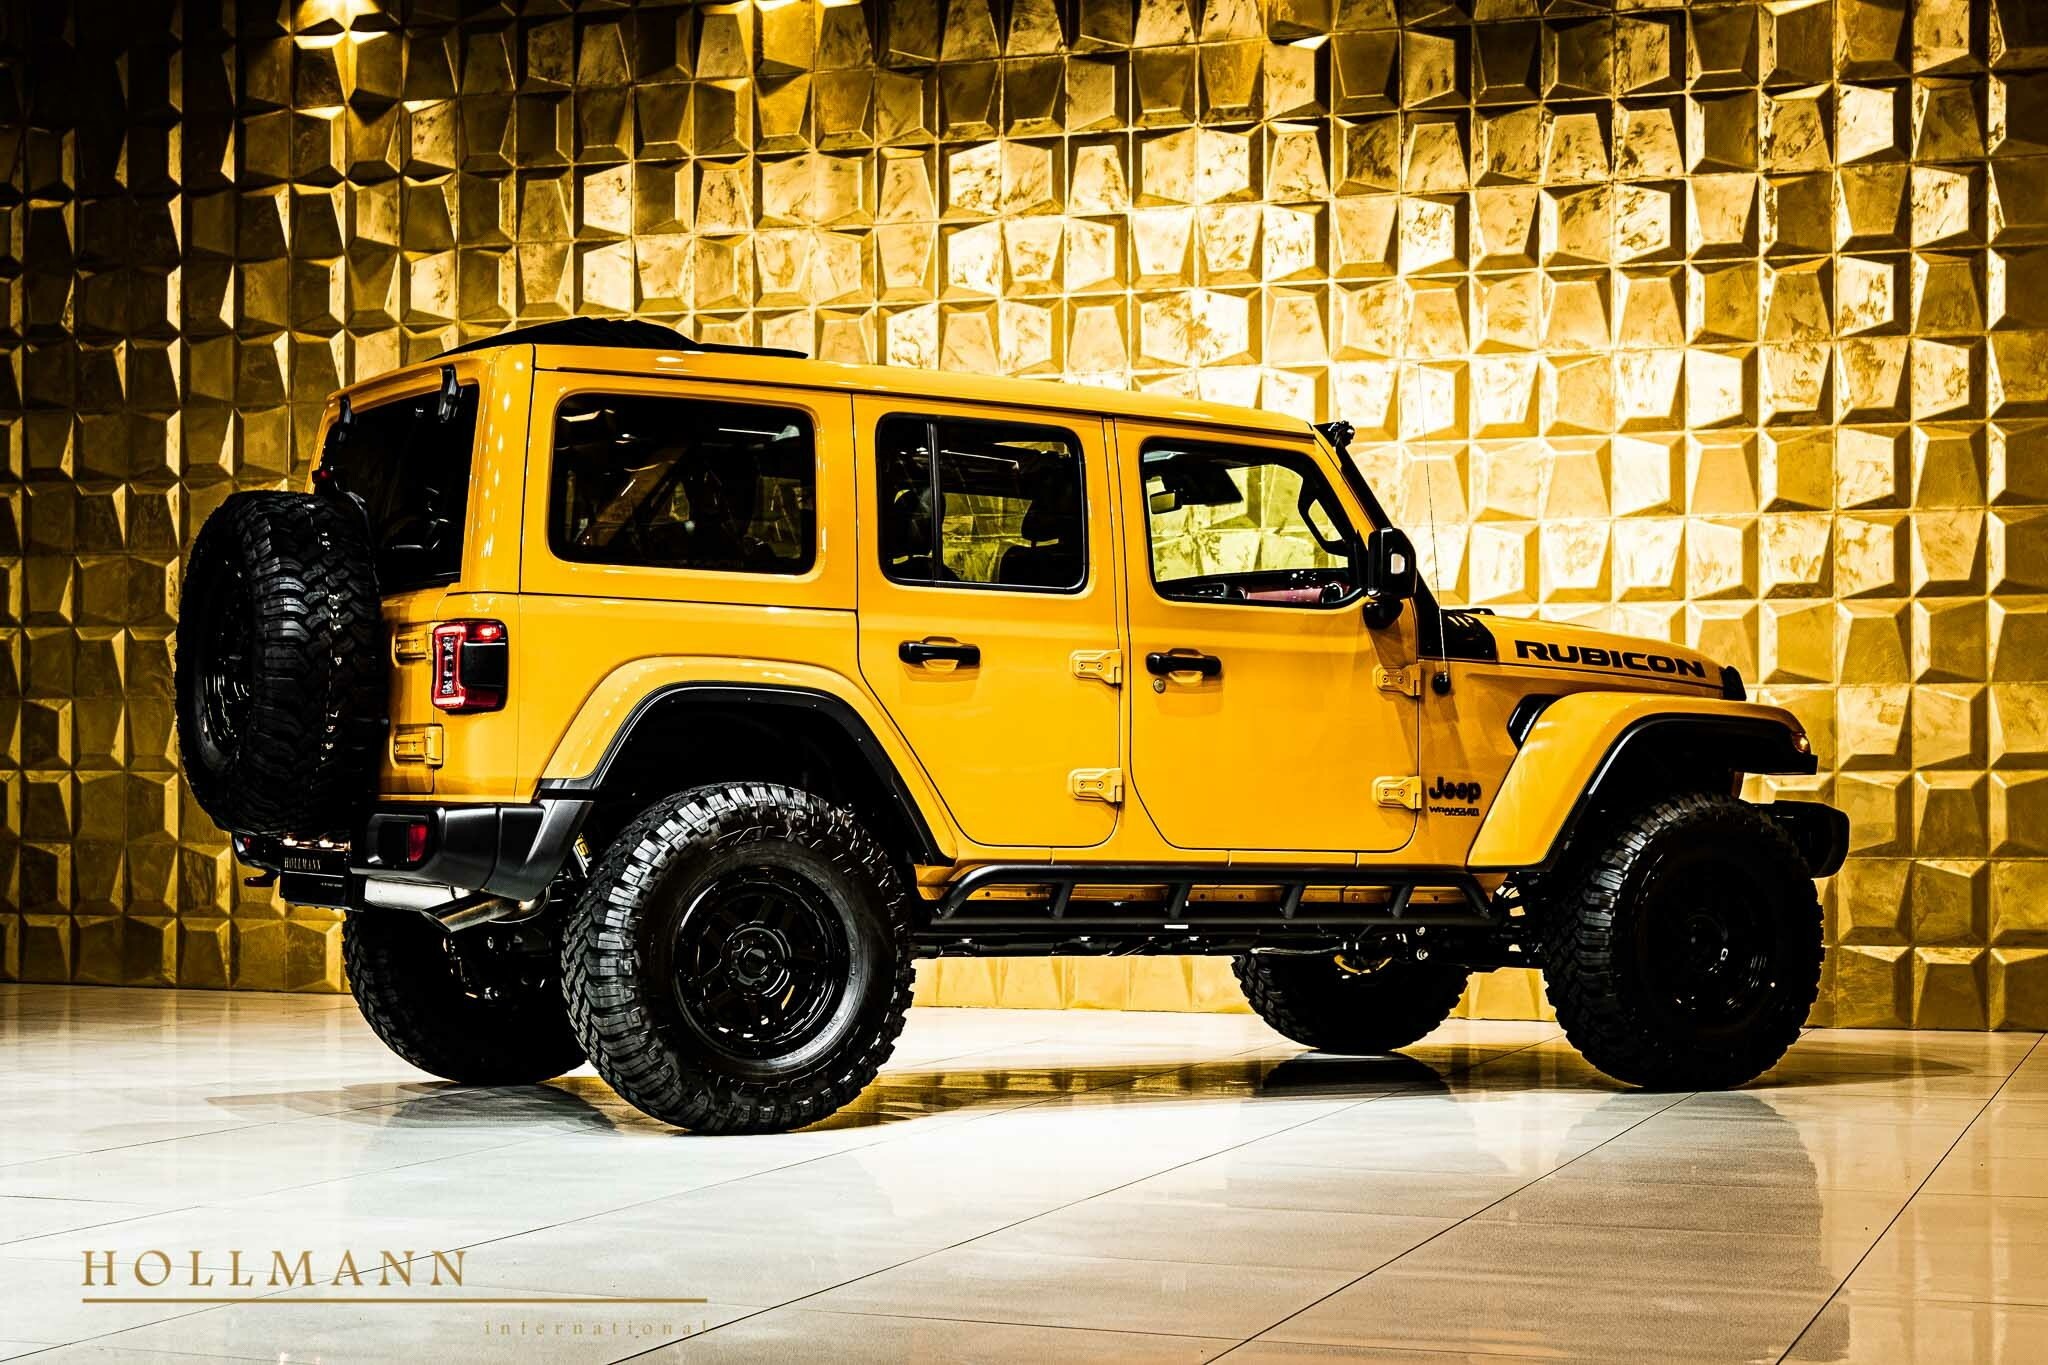 You'll Never Guess How Much This Customized Jeep Wrangler Costs